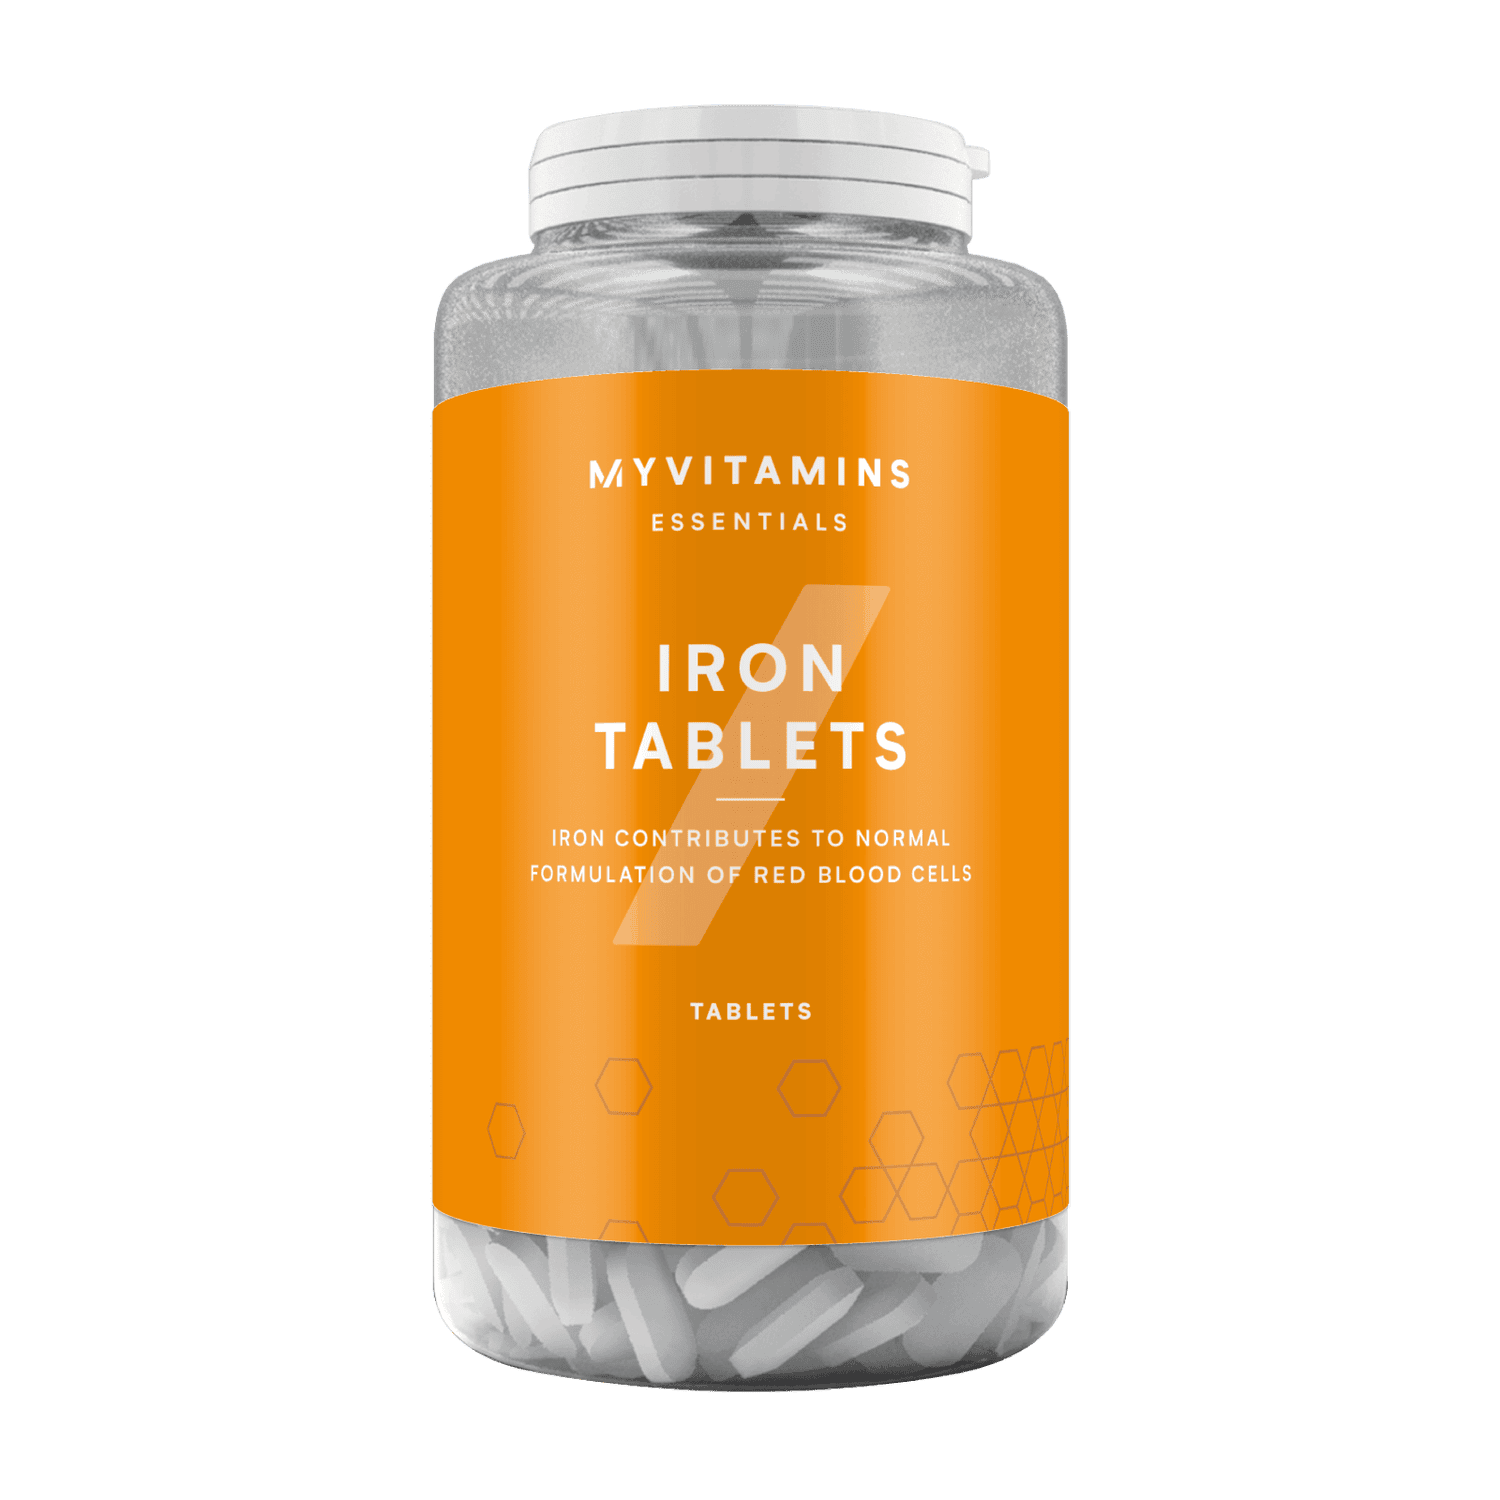 Myvitamins Iron Tablets - 90 (WE)Tablets